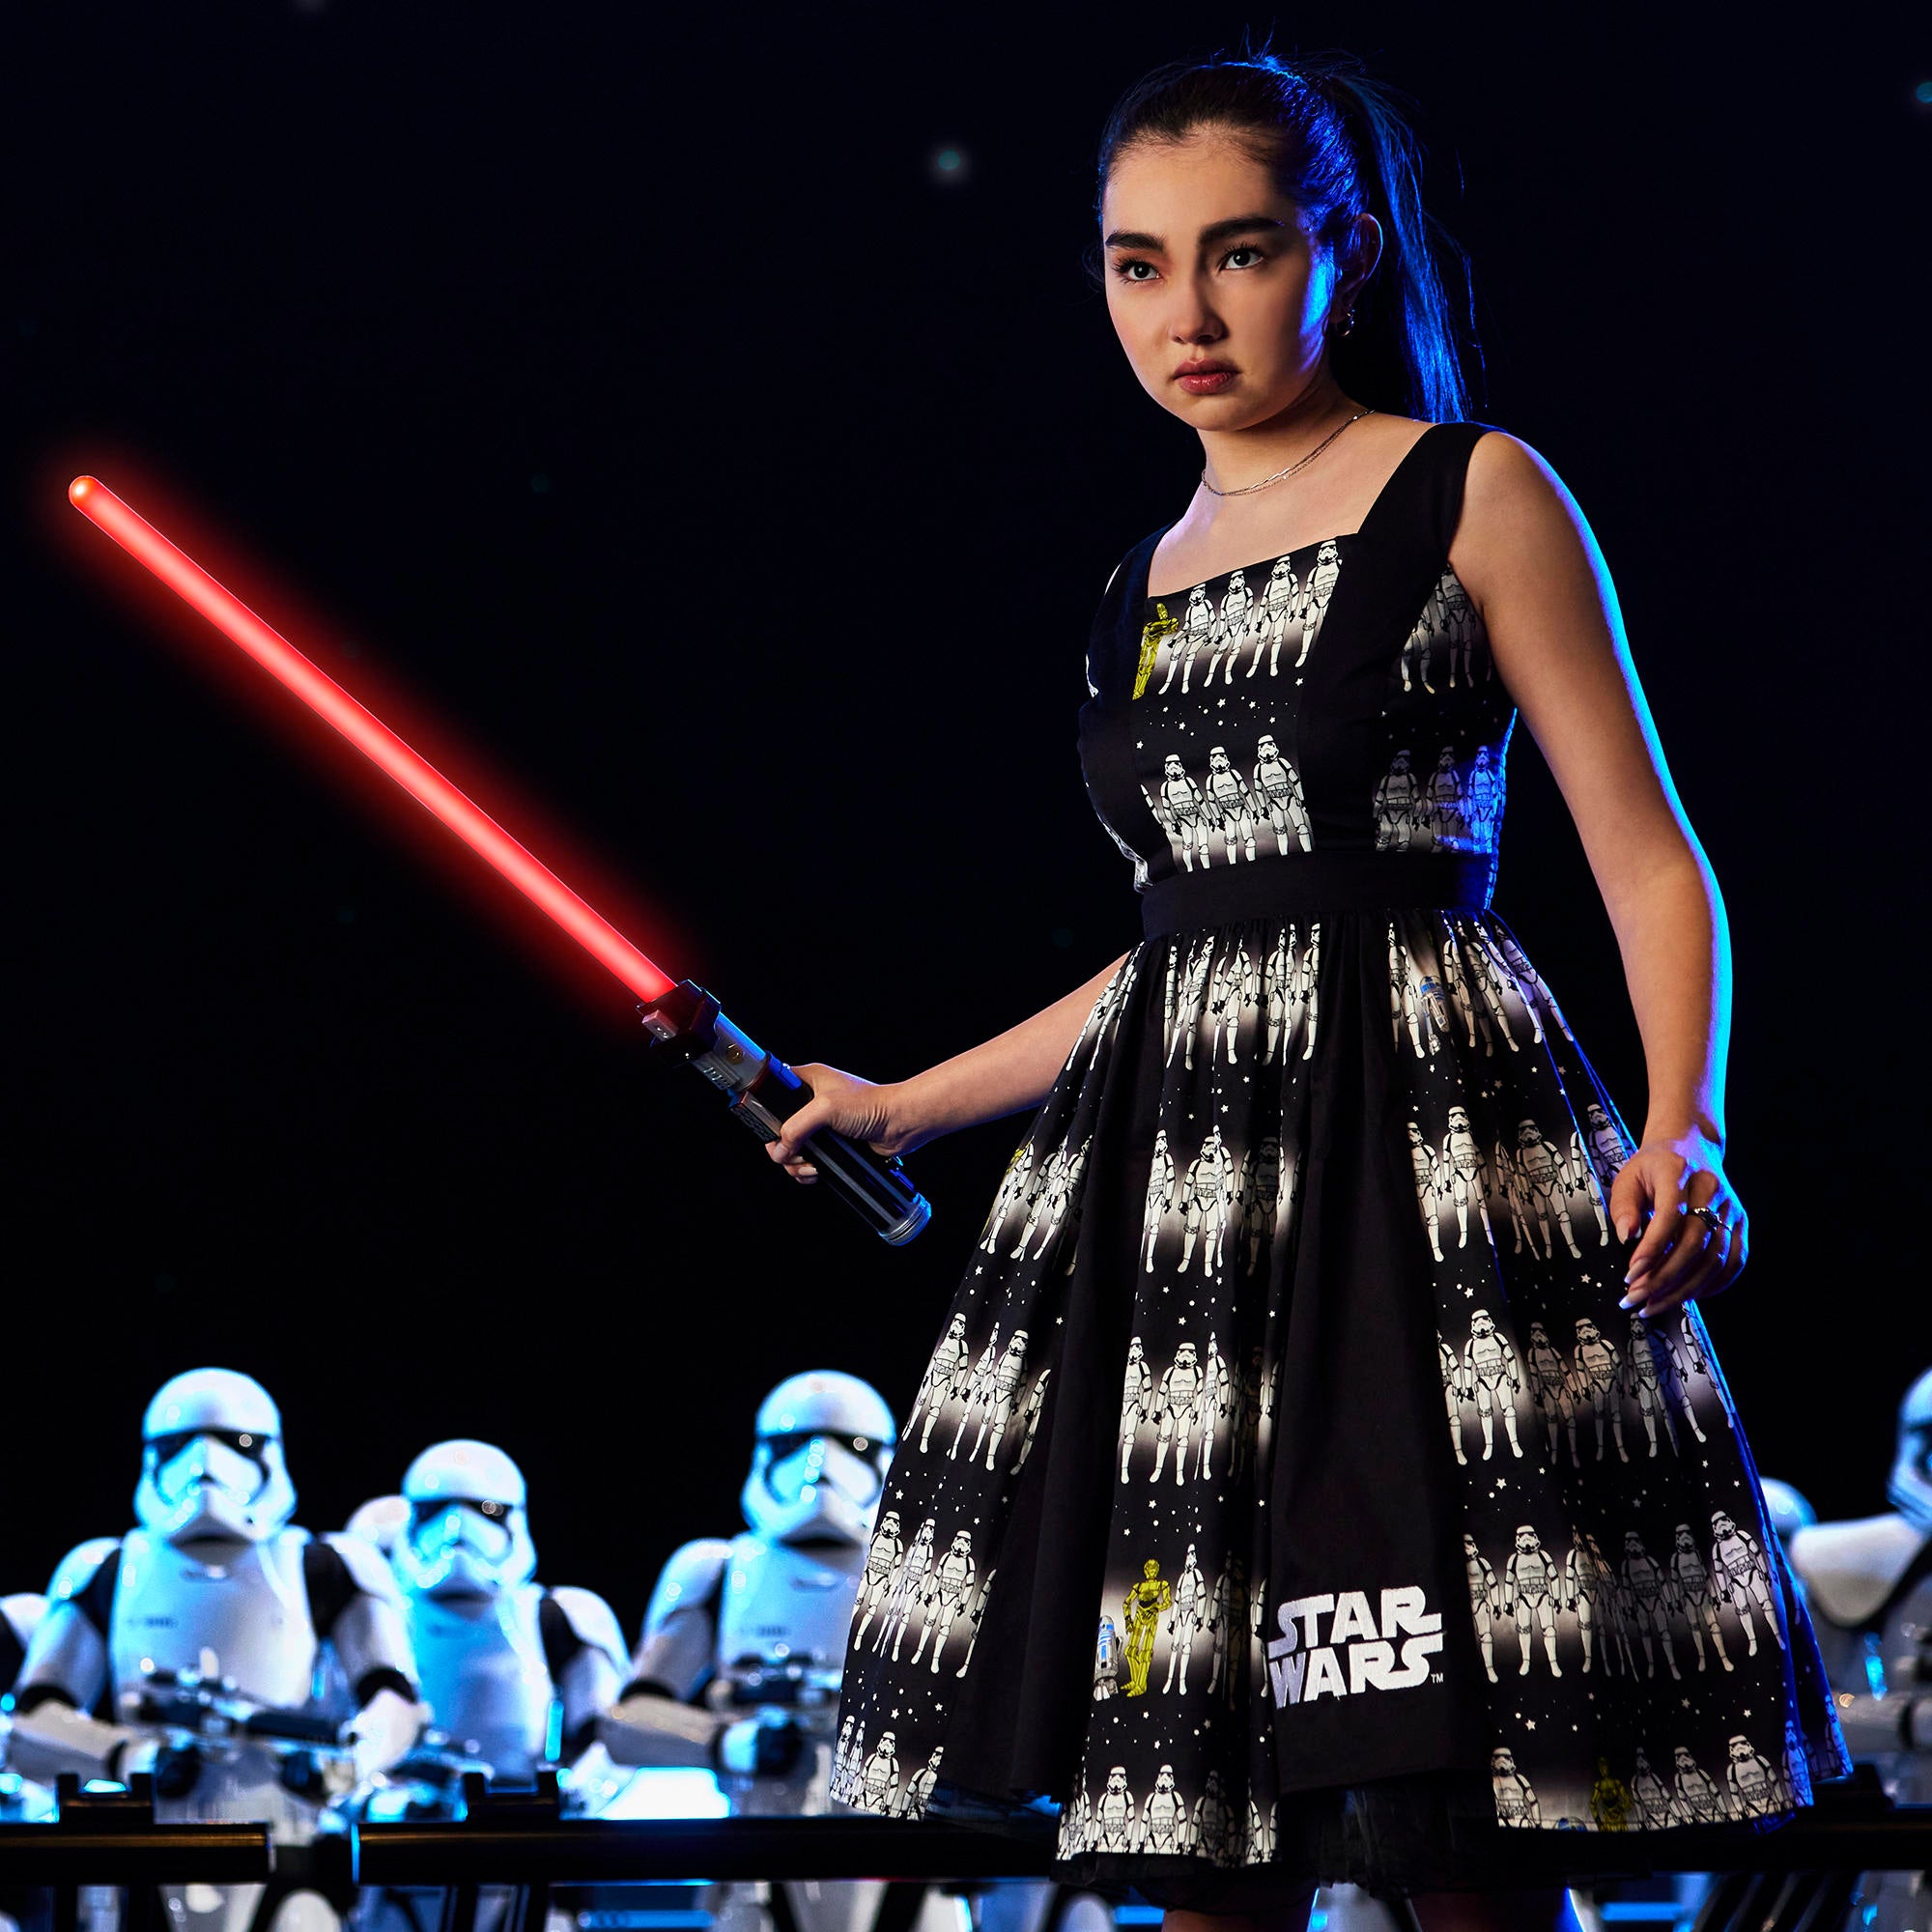 star-wars-imperial-stormtroopers-and-droids-dress-2000x2000-1478e37.jpg